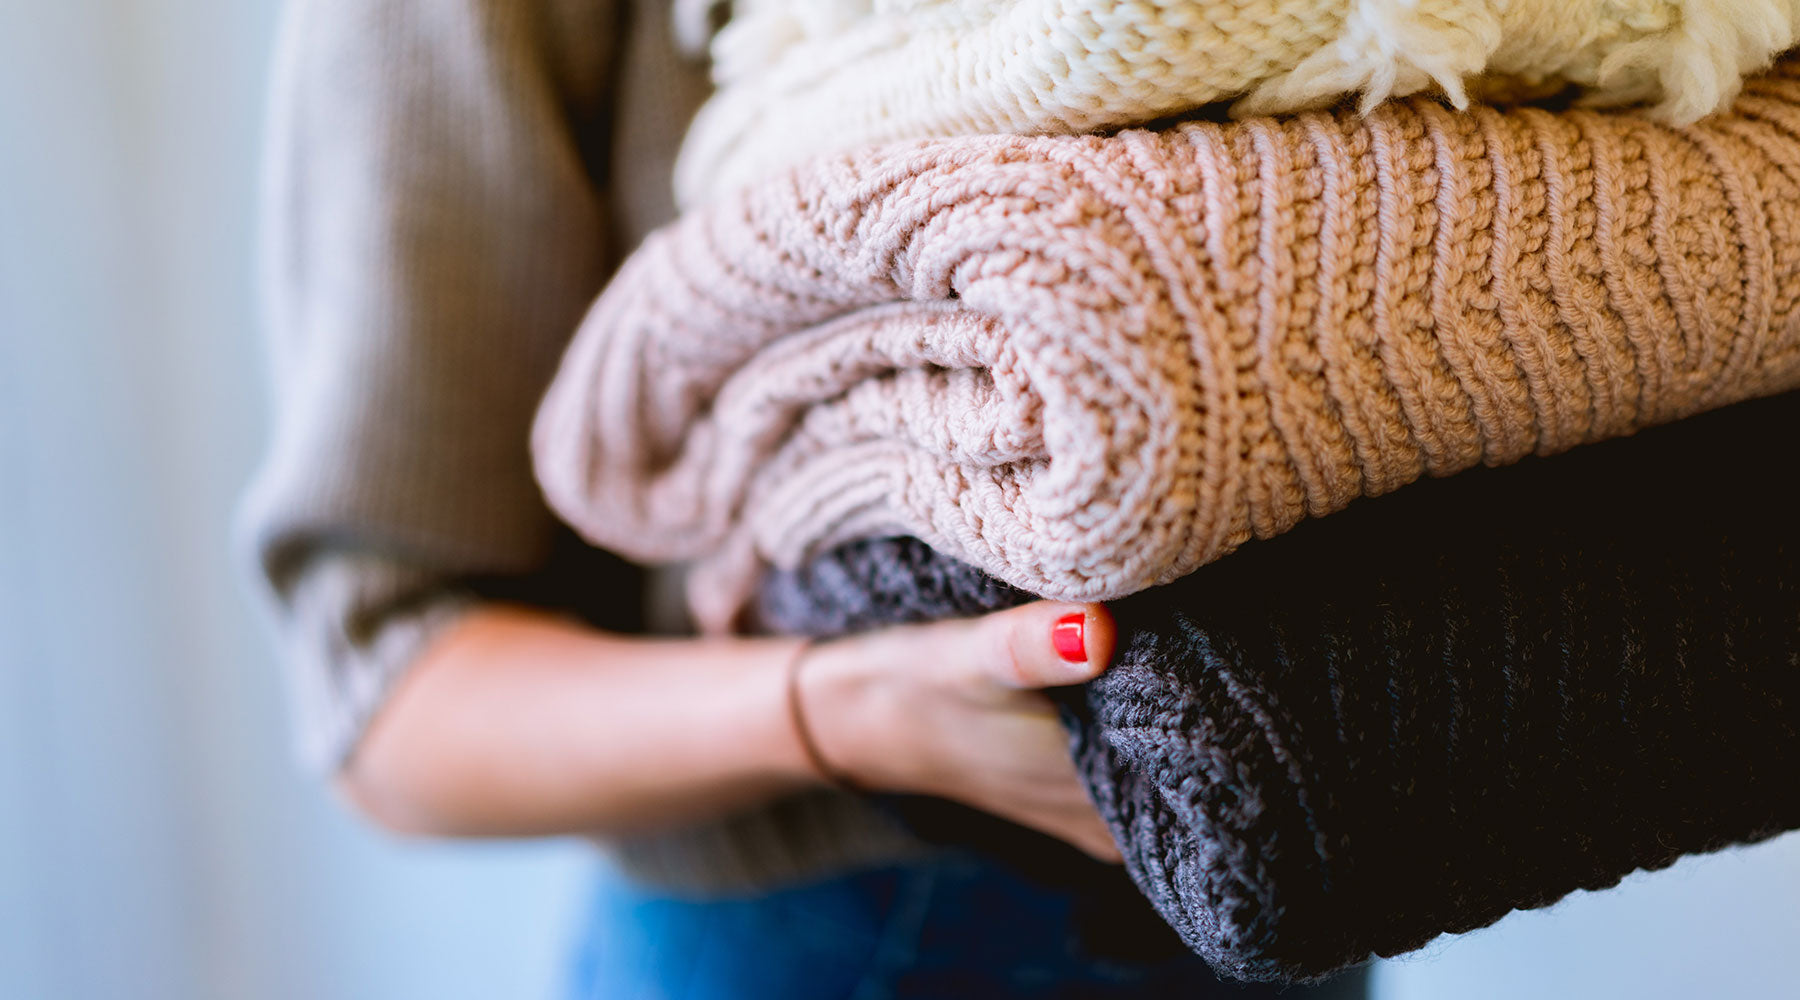 How to Knit a Sweater That Fits Perfectly